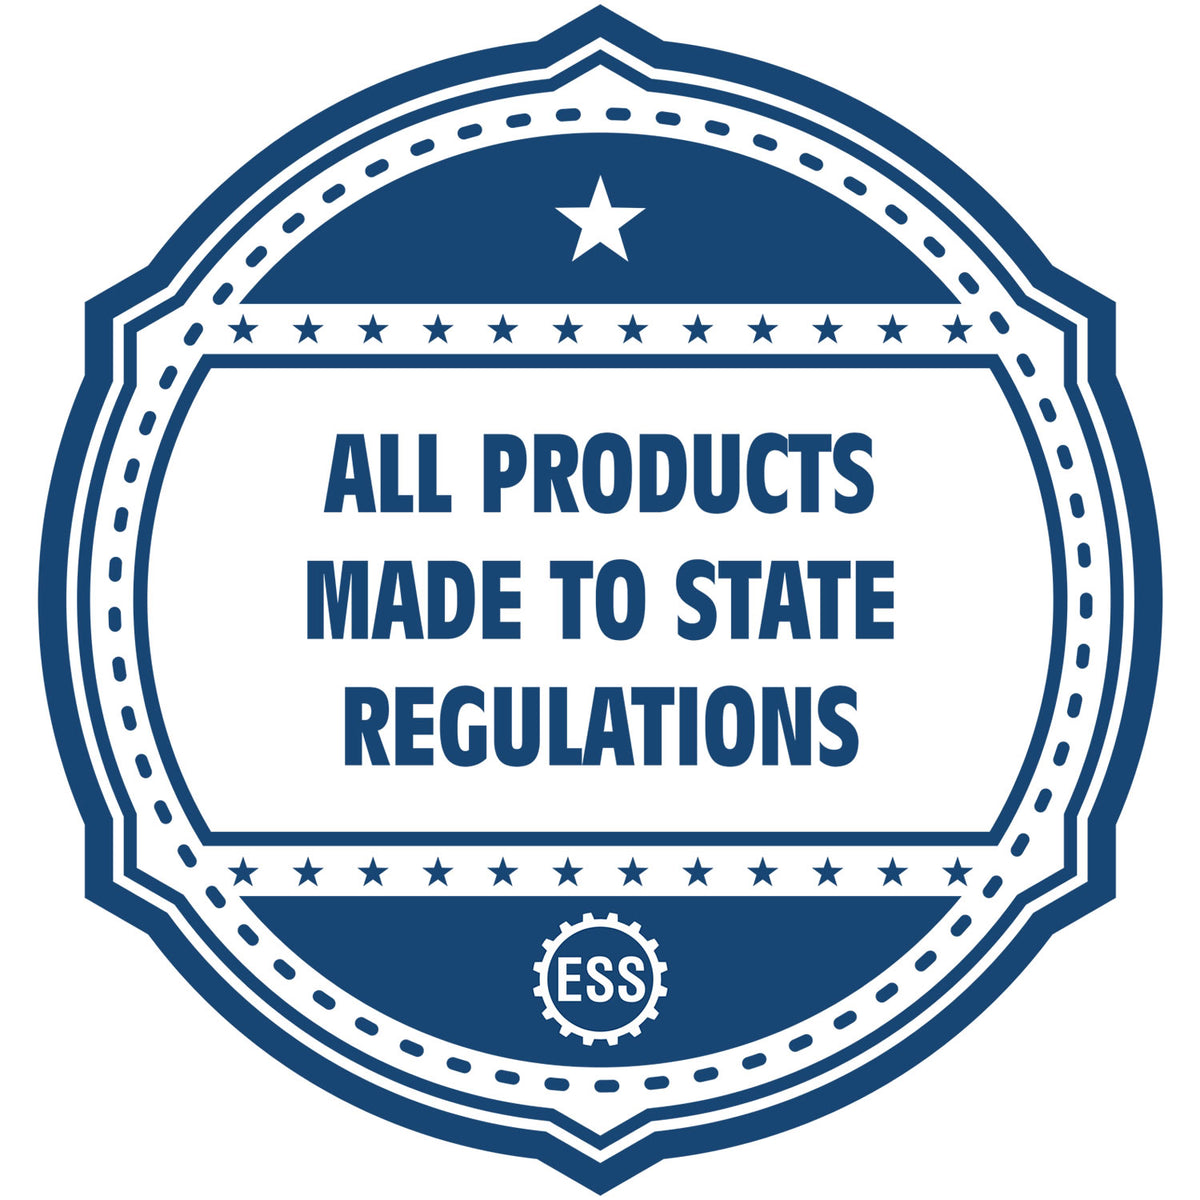 A blue icon or badge for the Gift Illinois Geologist Seal showing that this product is made in compliance with state regulations.